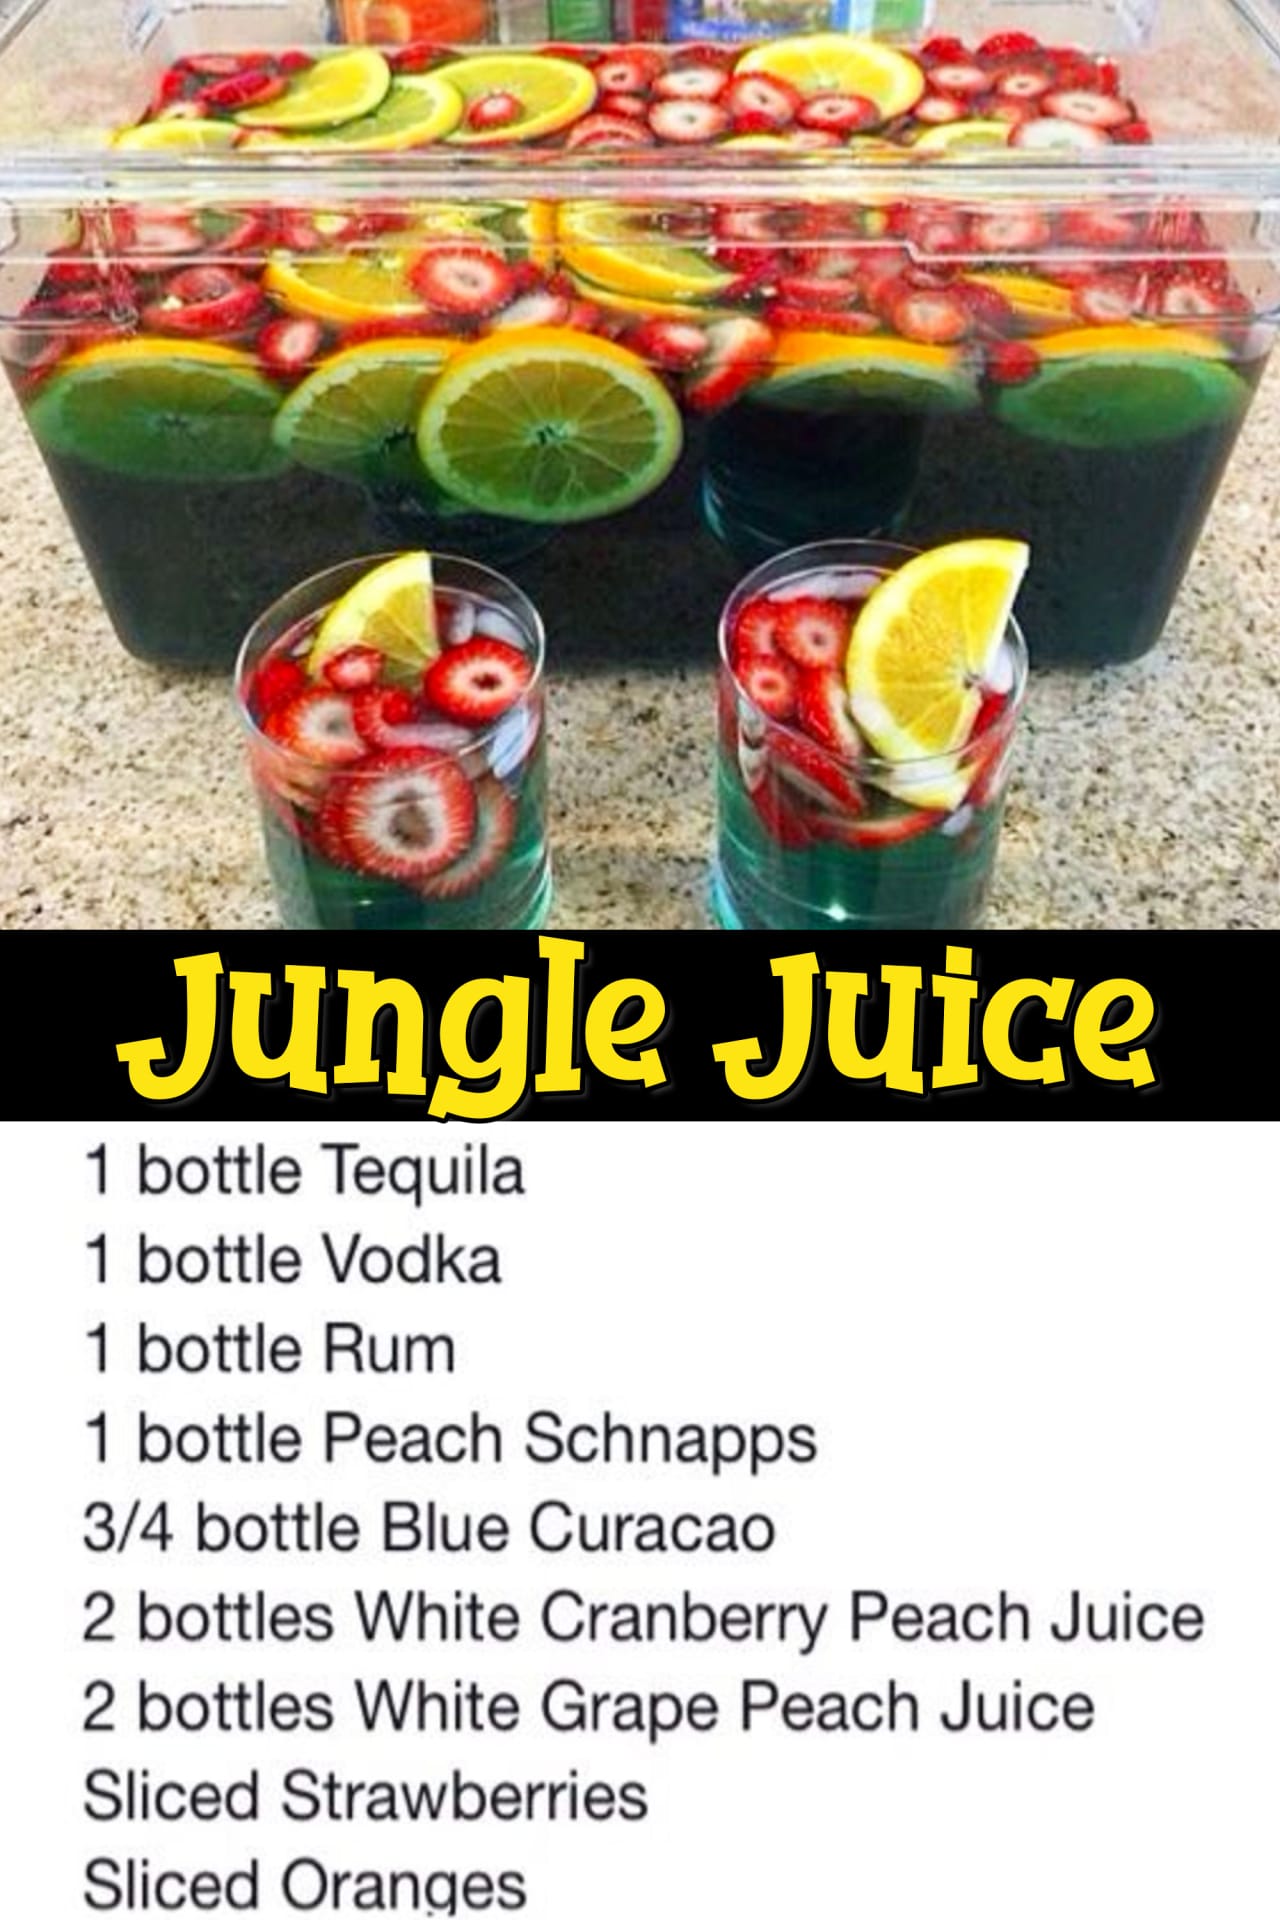 Jungle Juice Punch Recipe - Easy Punch Recipes for a Crowd and Easy Party Drinks Ideas - Cranberry Vodka Punch, Pineapple Orange Juice Alcoholic Drinks, Punch for 50 and Simple Punch Recipes for a Crowd, Party, Brunch, Cookout or Bridal Shower - non-alcoholic punch recipes and simple alcoholic punch recipes, non-alcoholic holiday punch, easy fruit punch recipes, easy punch recipes with sprite and pineapple juice, jungle juice recipe with fruit